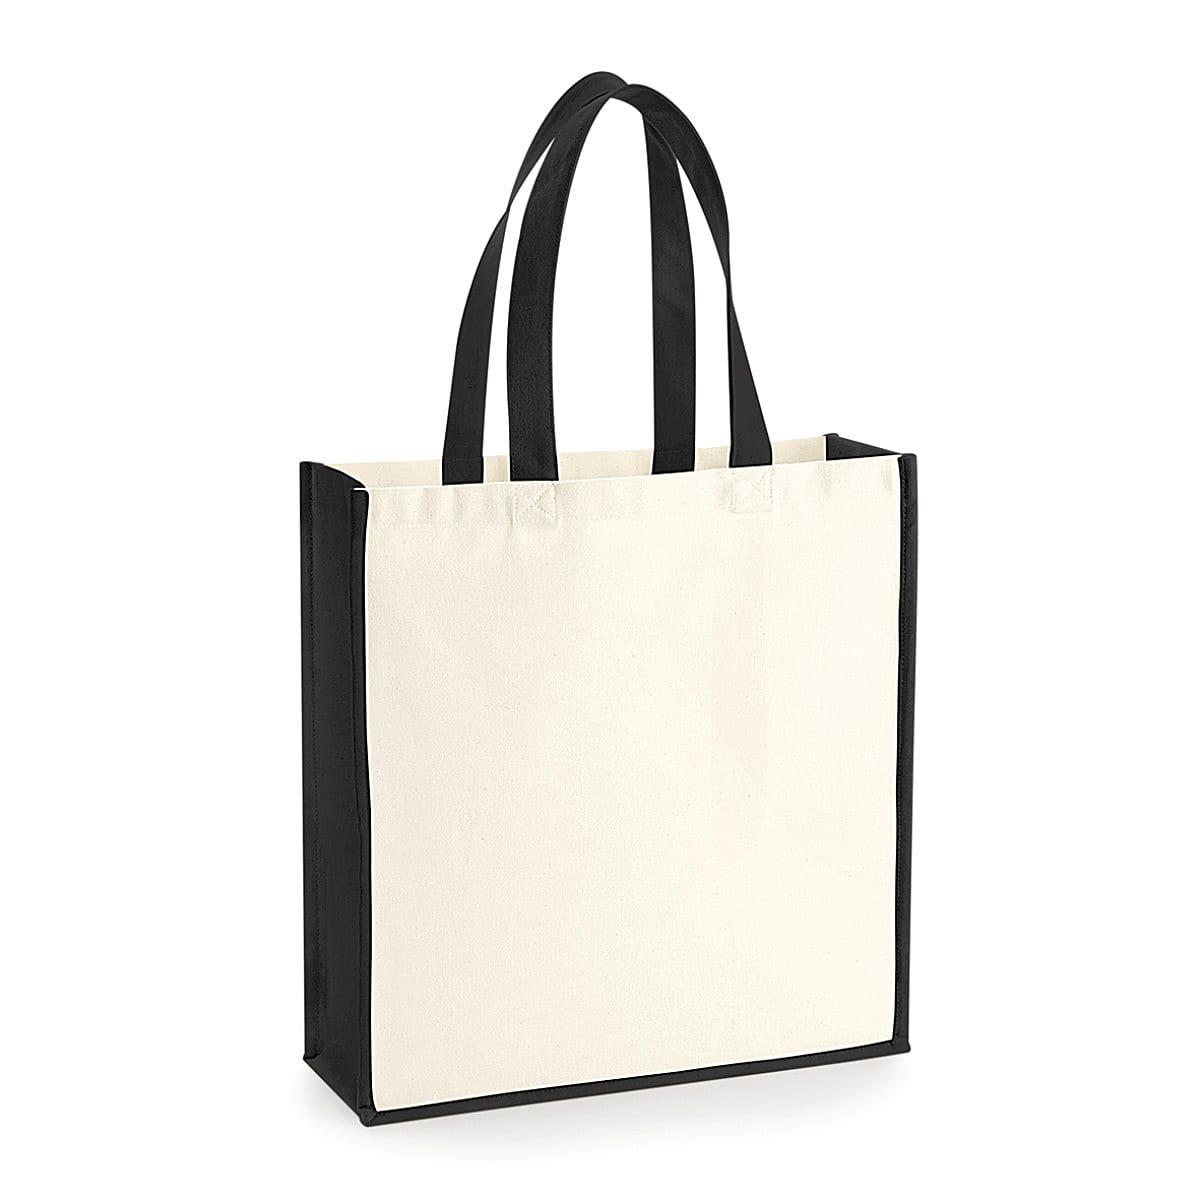 Westford Mill Gallery Canvas Tote in Natural / Black (Product Code: W600)